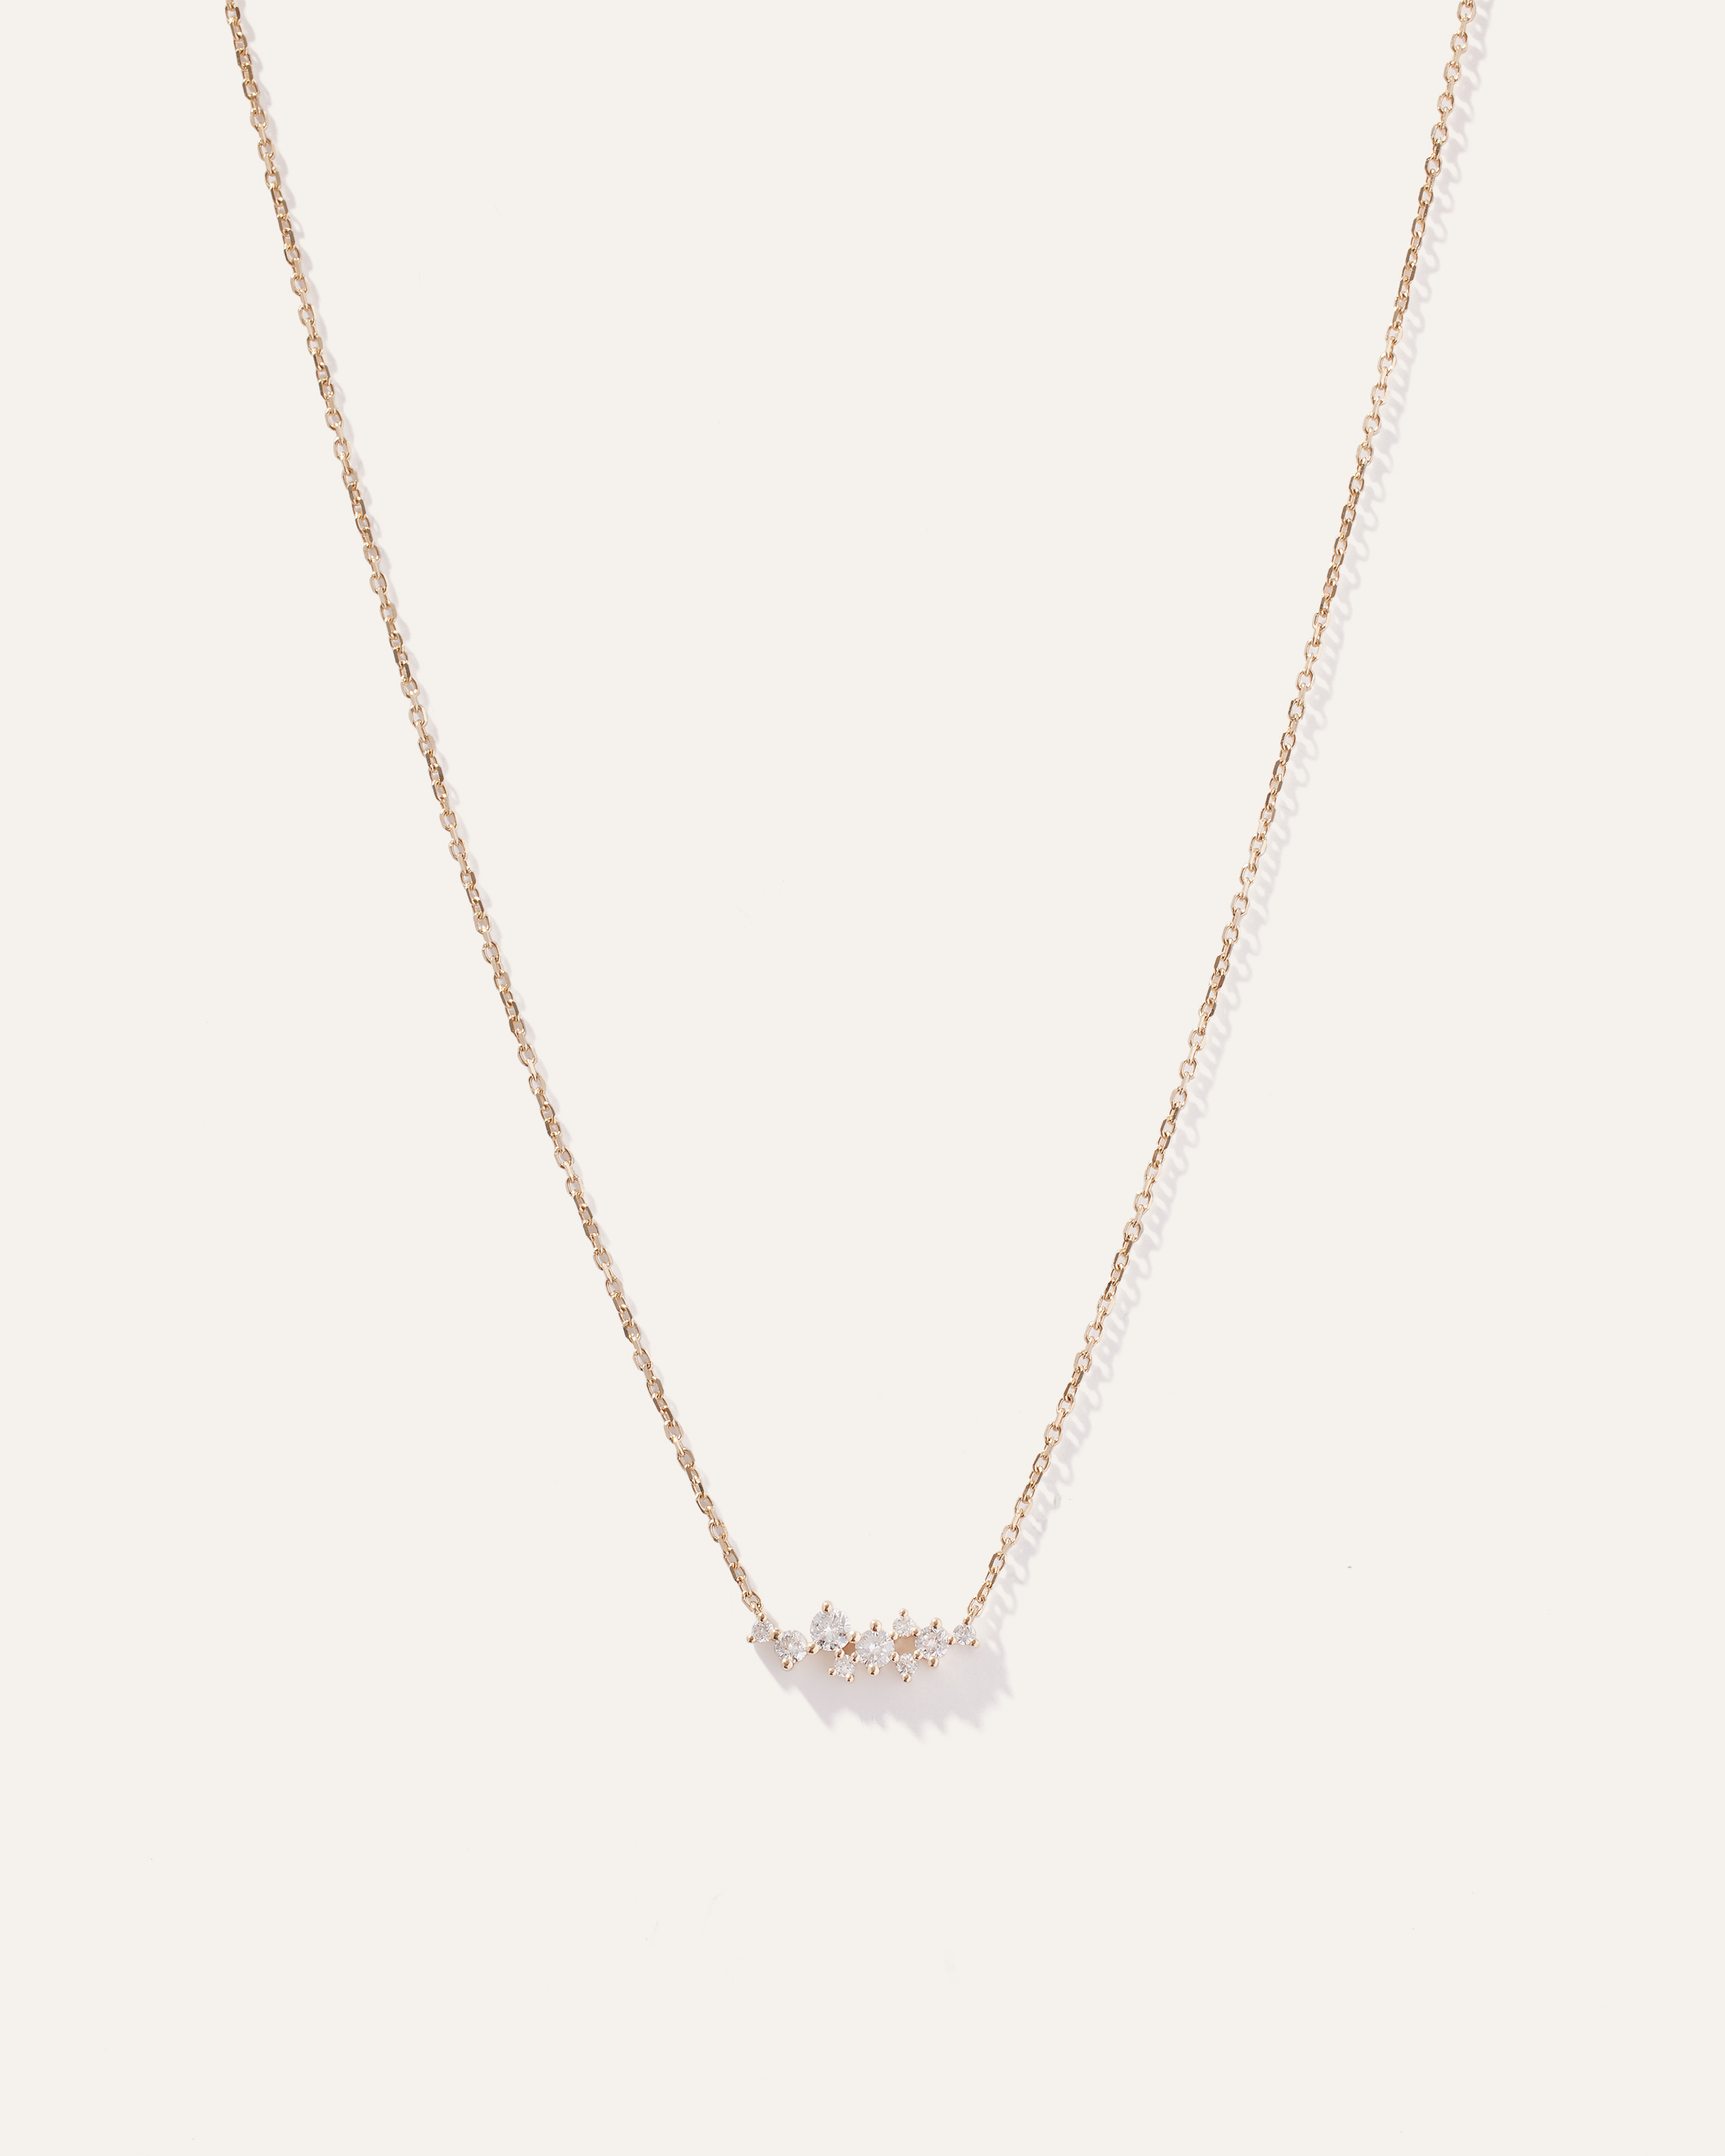 Quince Women's 14k Gold Diamond Scatter Necklace